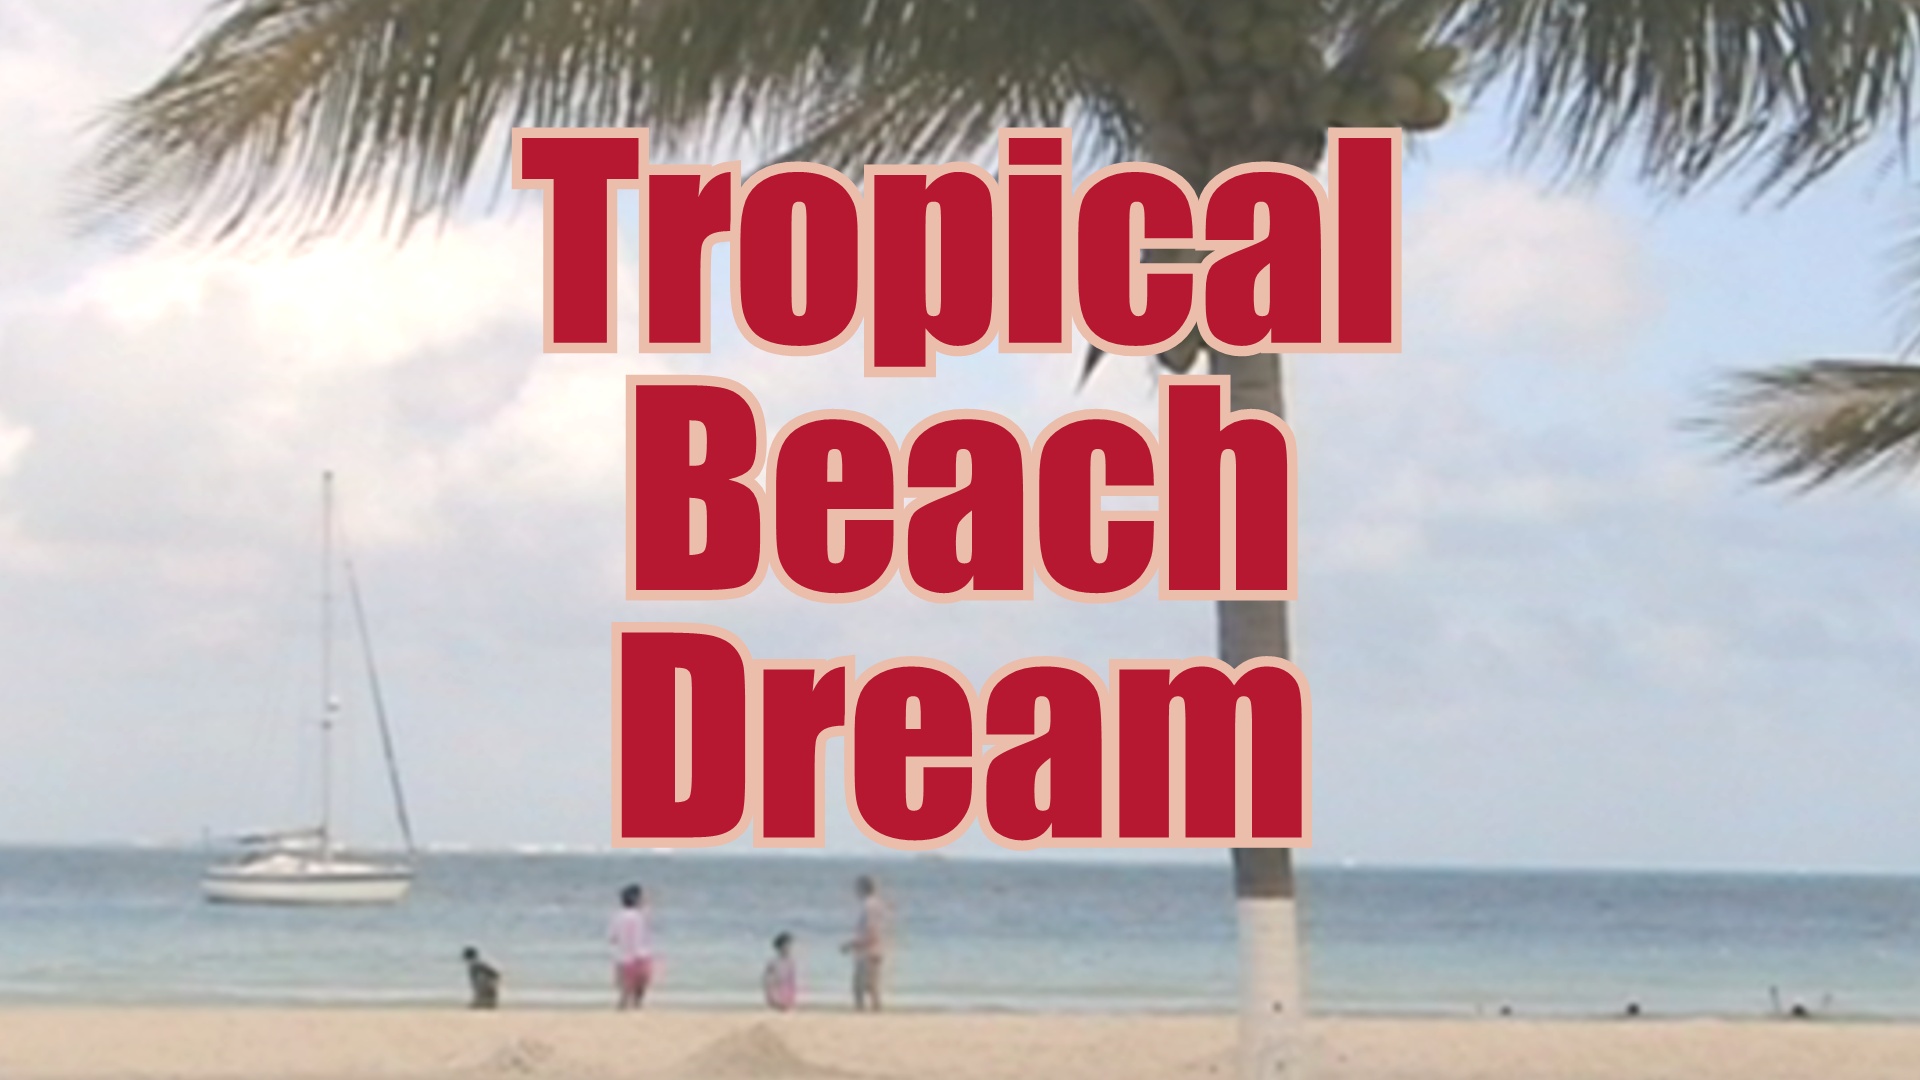 meaning of tropical beach dream